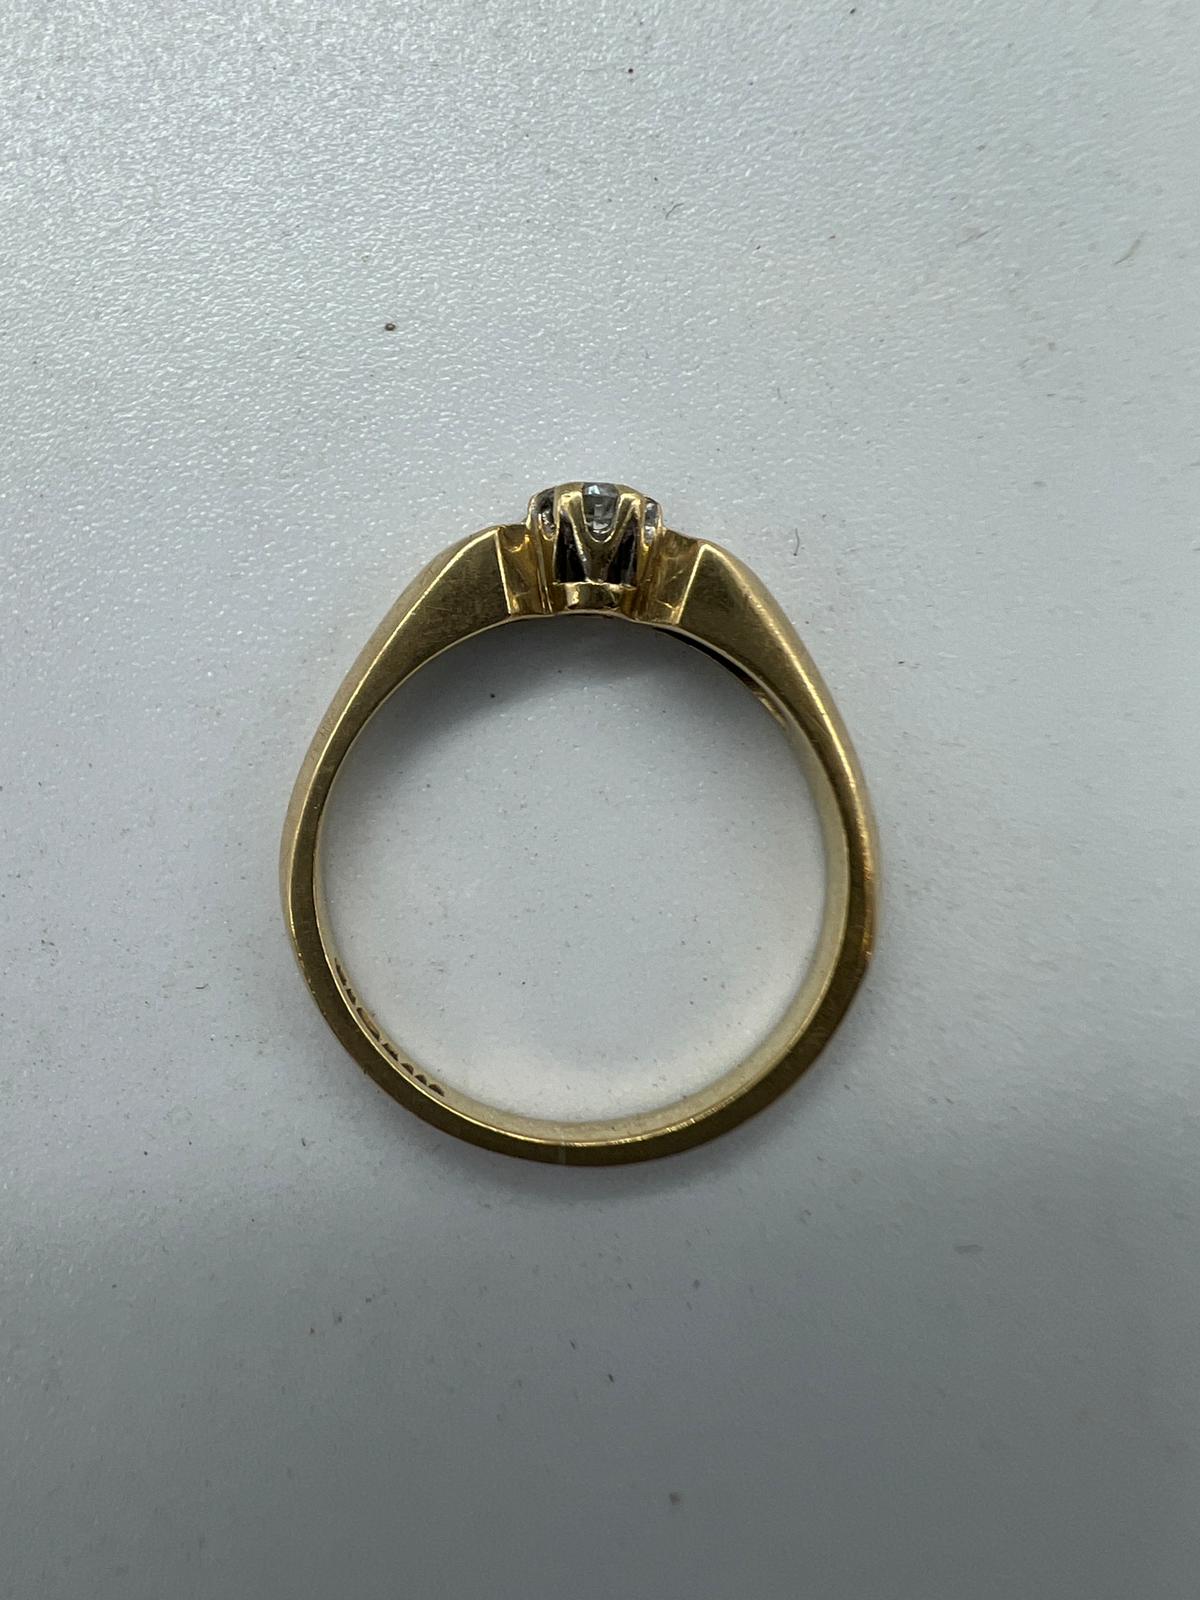 A 9ct gold and diamond ring approximate size M - Image 6 of 7